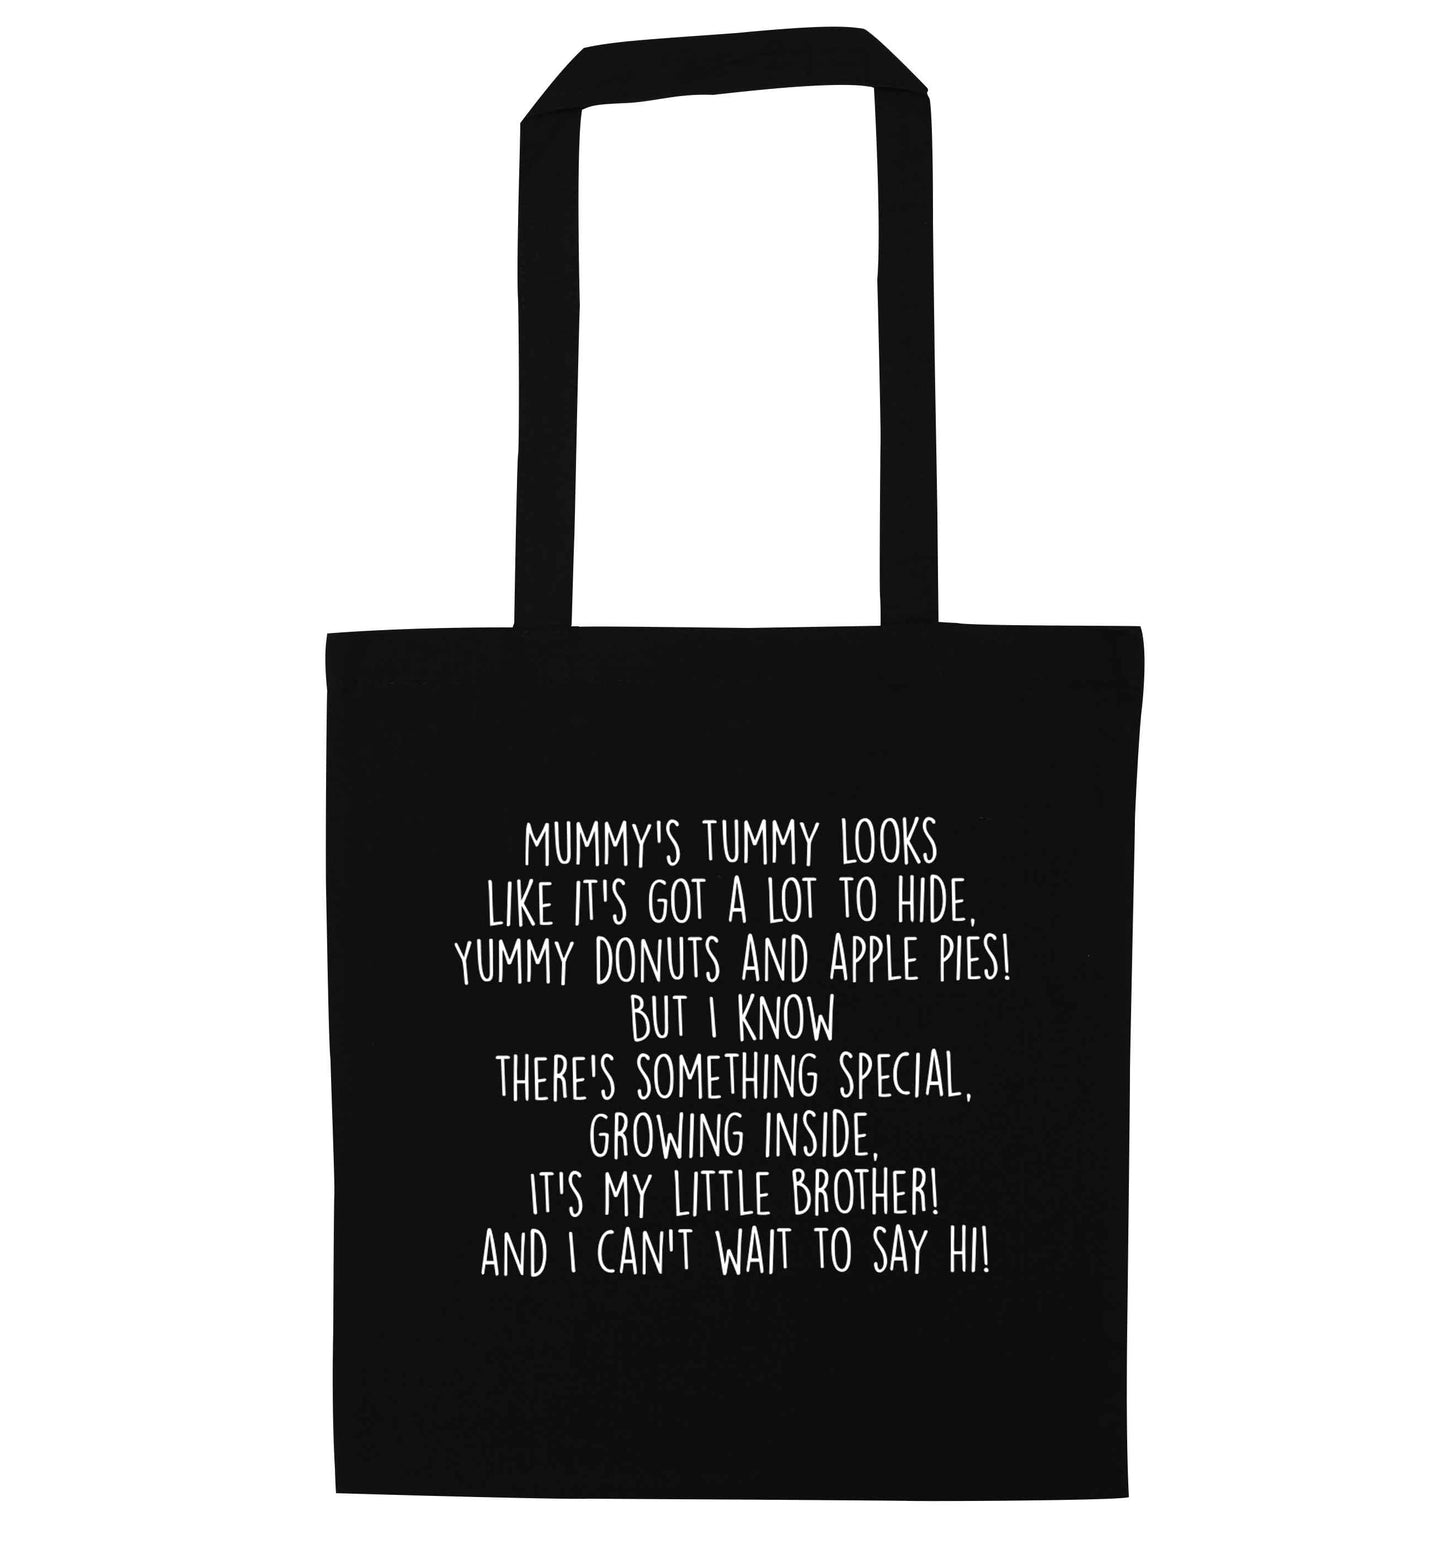 Something special growing inside it's my little brother I can't wait to say hi! black tote bag